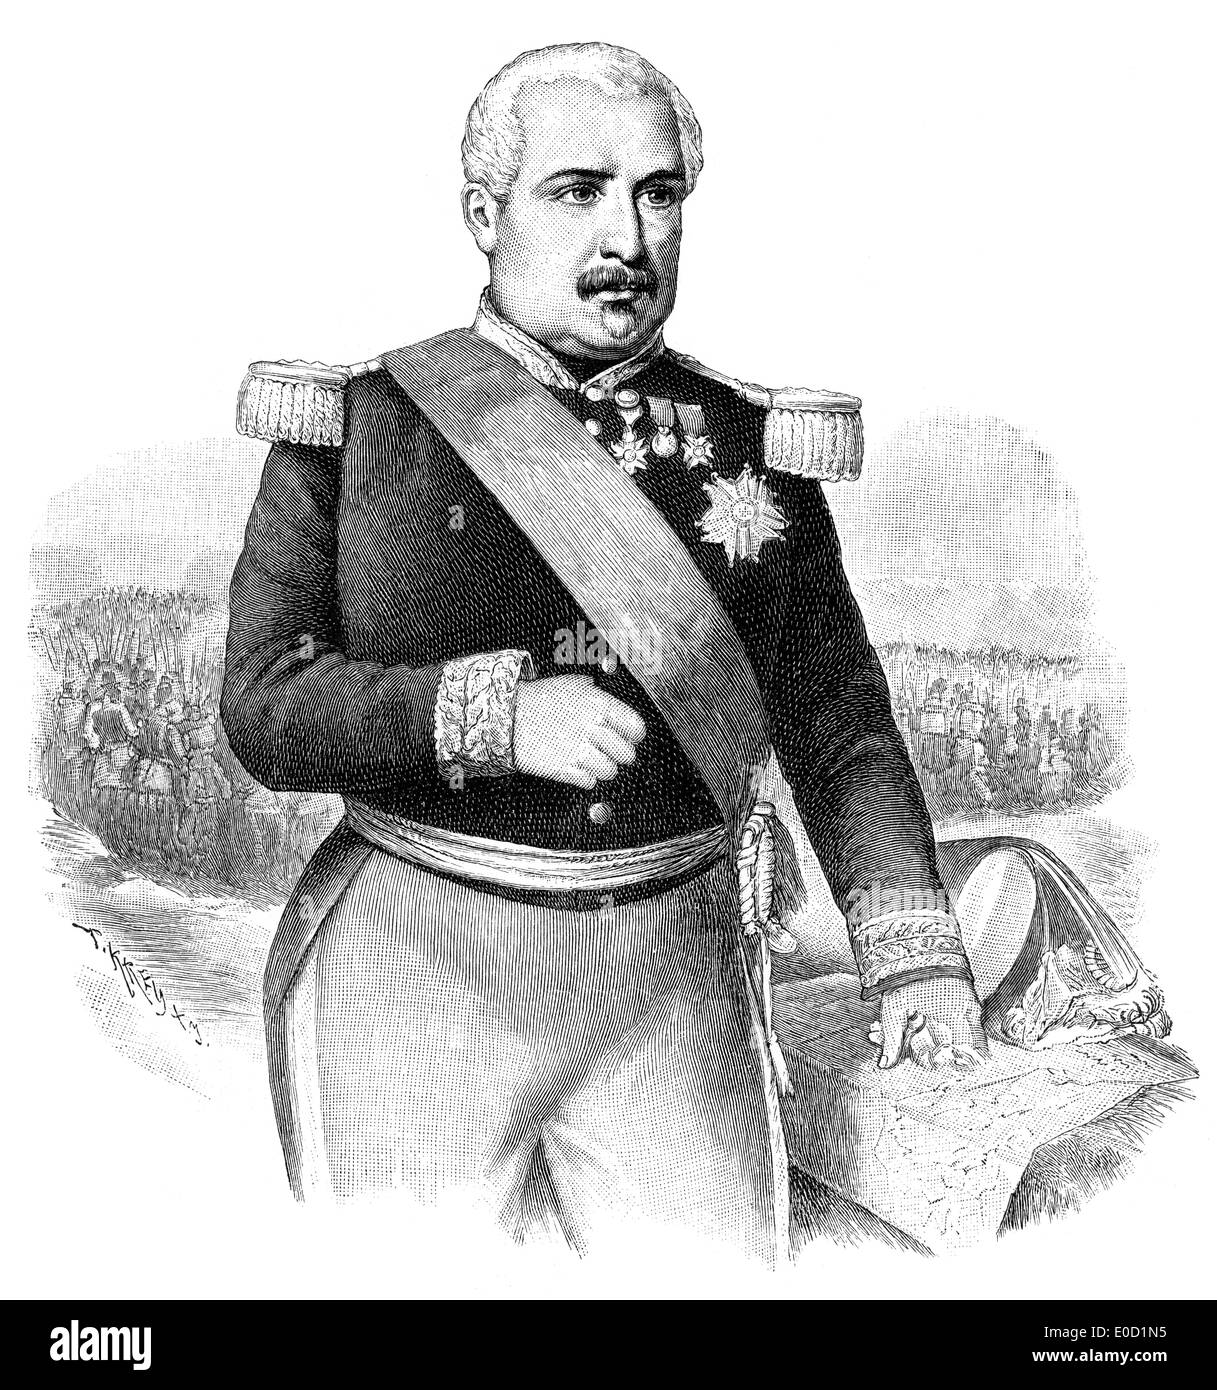 Aimable Jean Jacques Pélissier, 1st Duc de Malakoff , 1794-1864, a marshal of France, Stock Photo